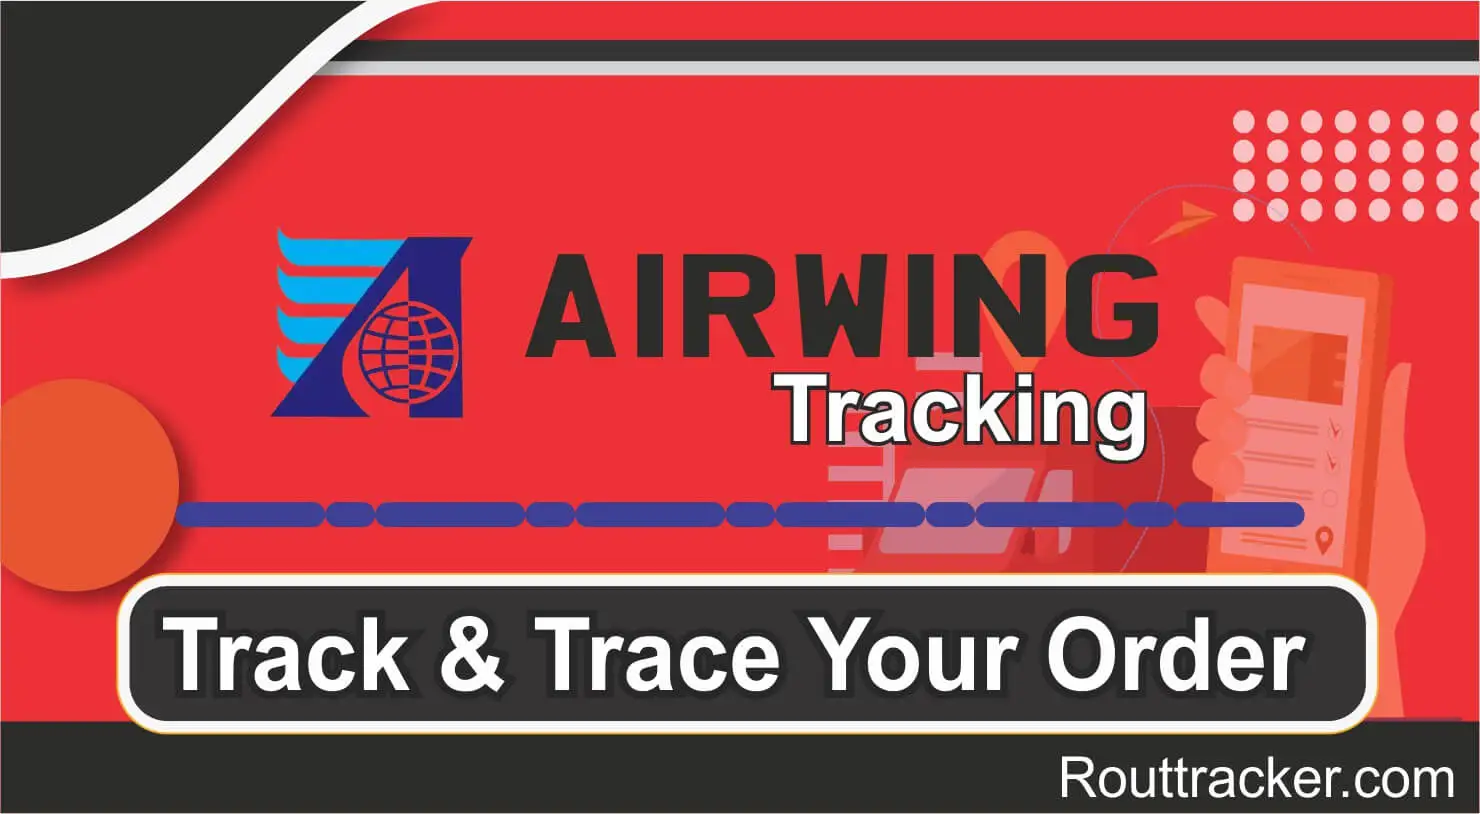 Airwings Tracking